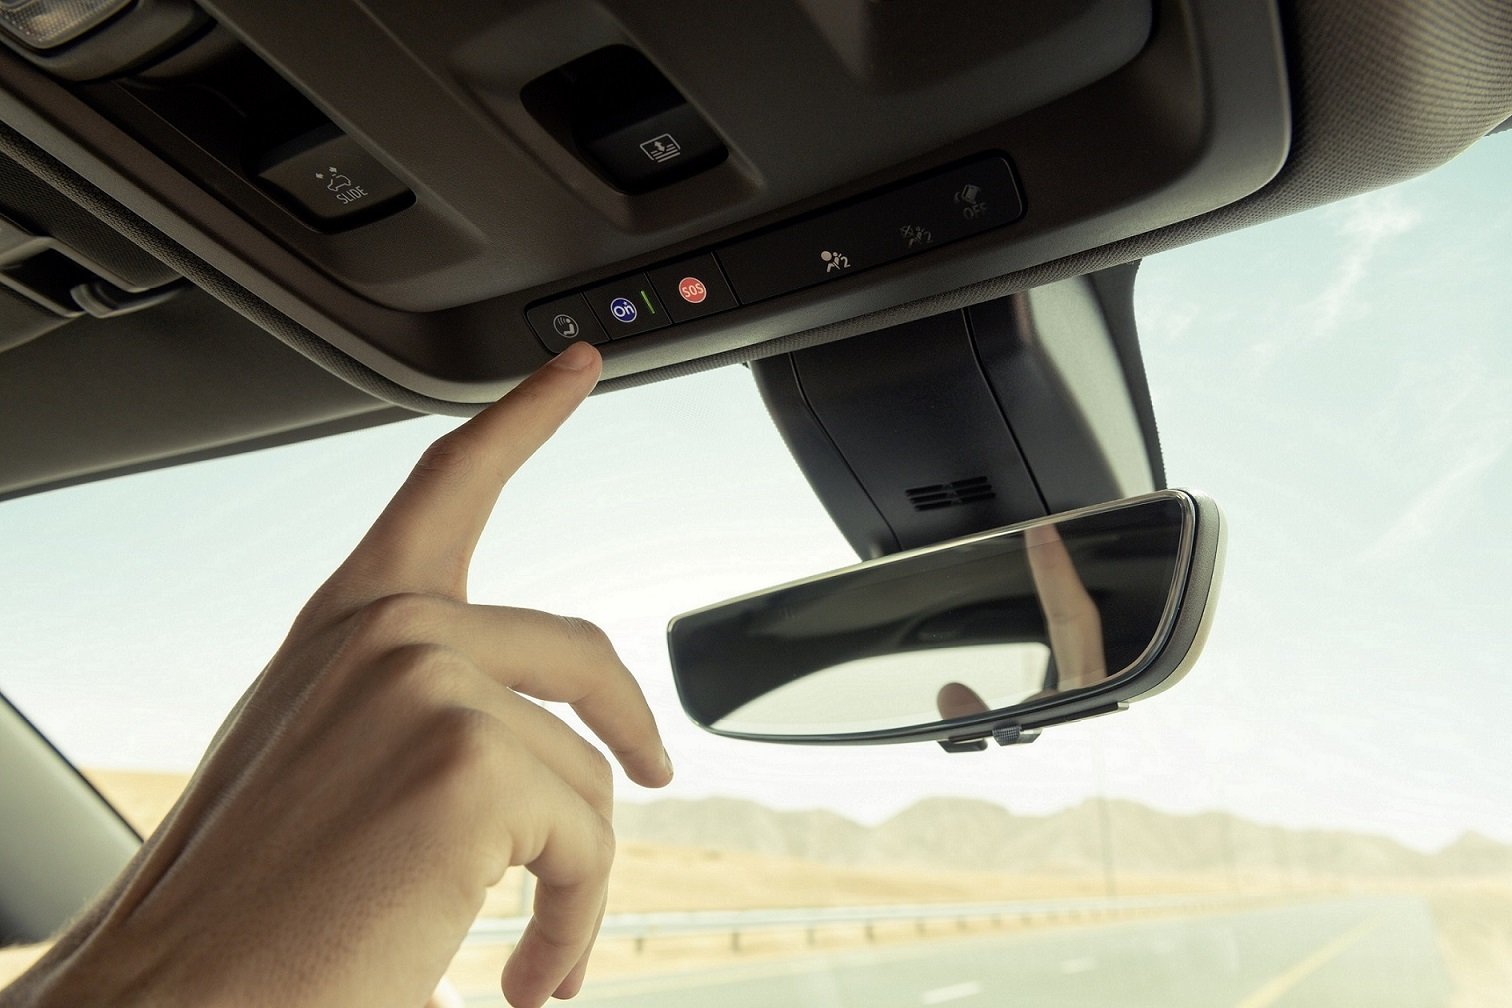 OnStar launched by General Motors in the UAE